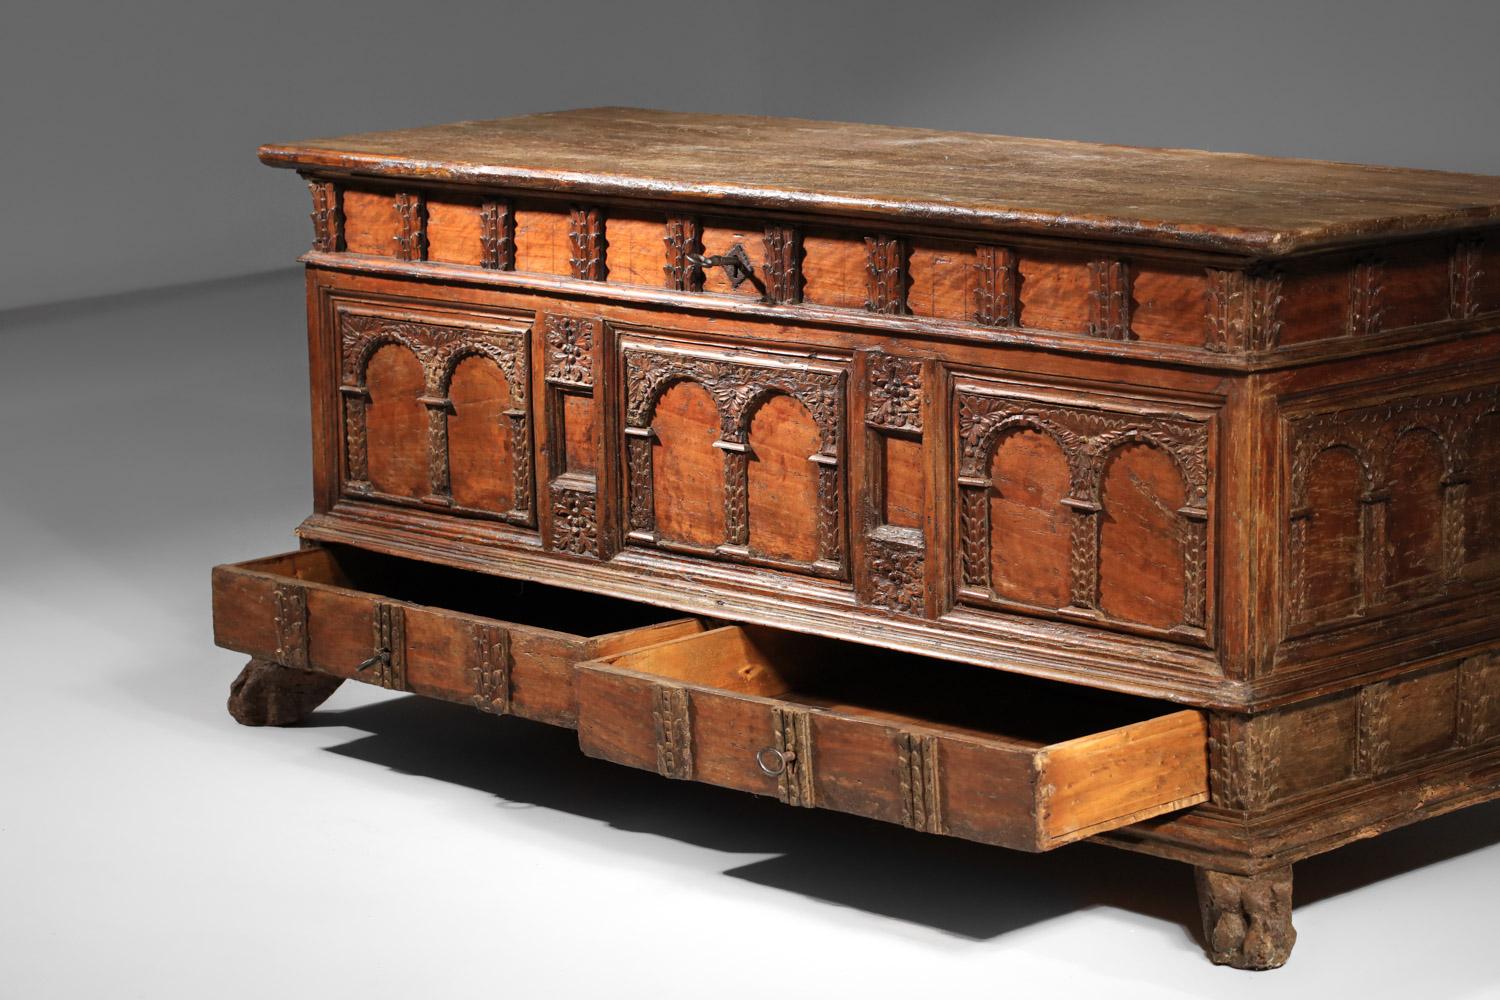 17th century Spanish or Italian carved solid wood chest For Sale 5